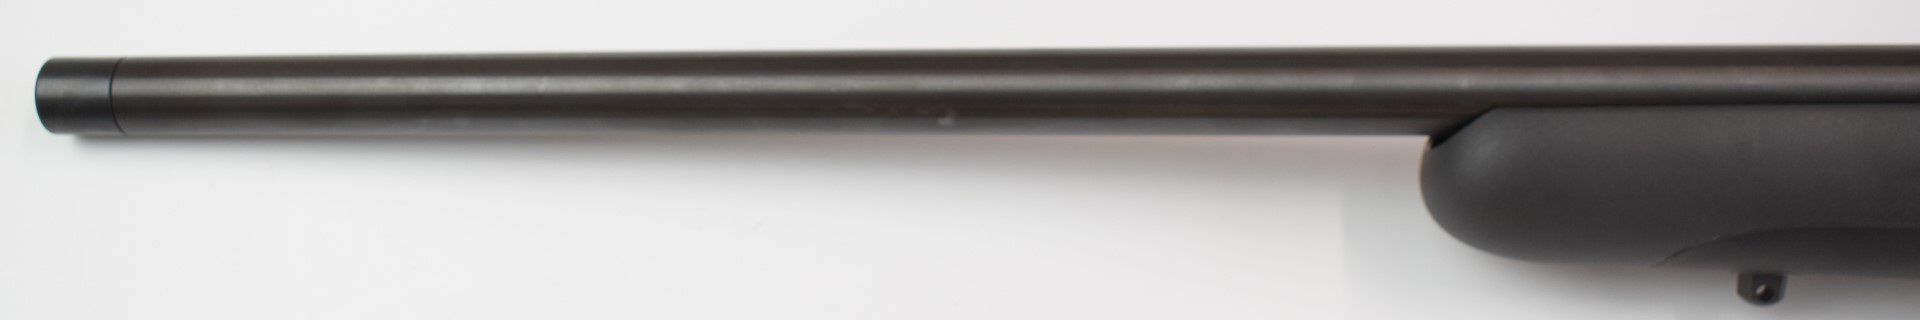 Mauser M18 .243 bolt-action rifle with composite stock, semi-pistol grip, sling mounts and 22.5 inch - Image 20 of 28